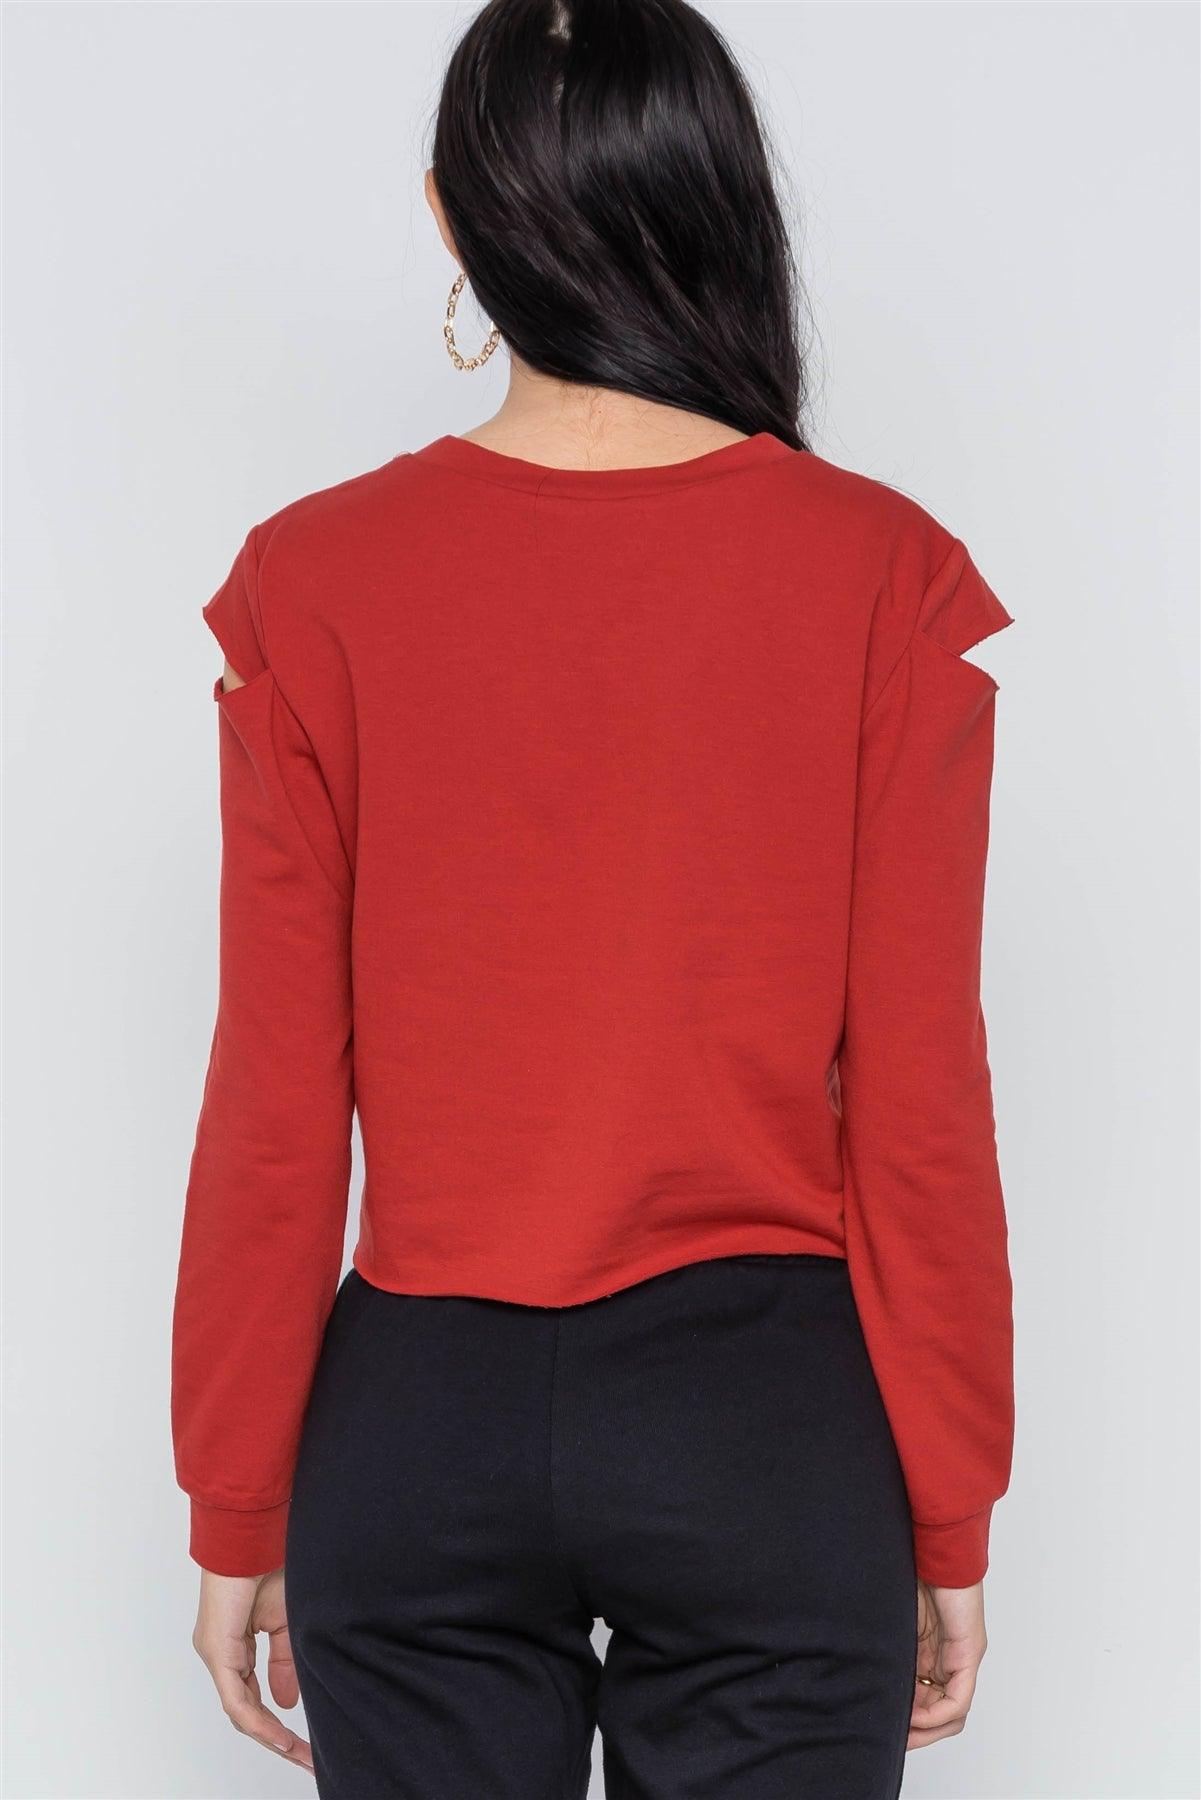 Rust Cold Shoulder Long Sleeve Graphic Top /2-1